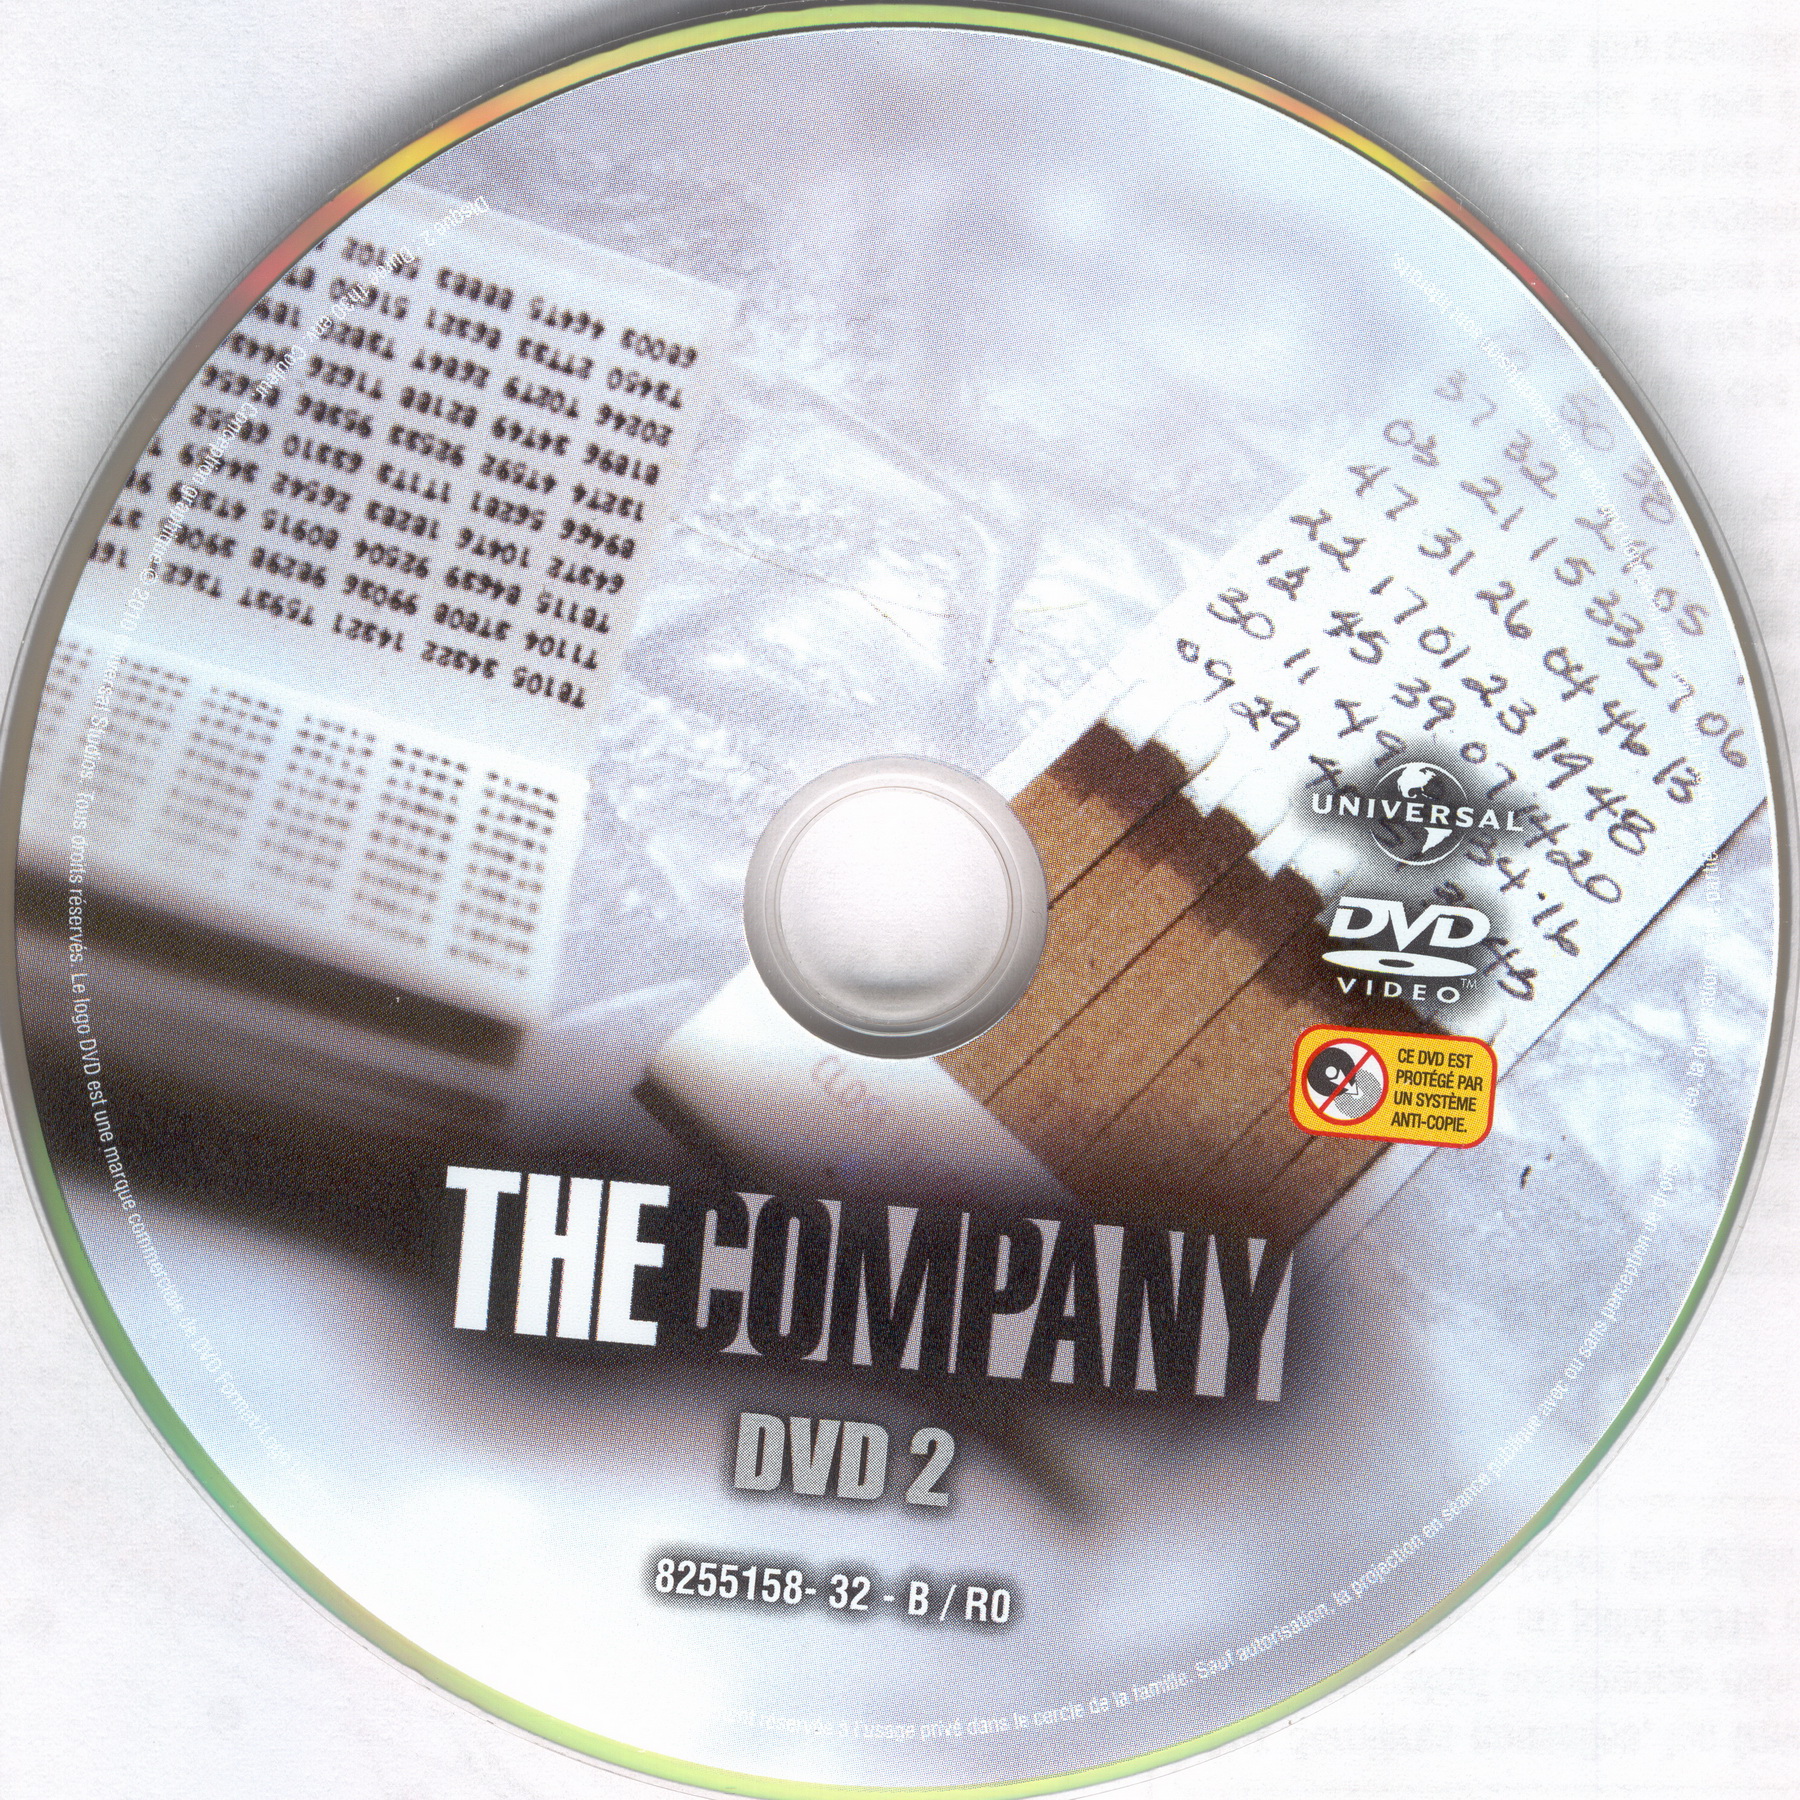 The company DISC 2